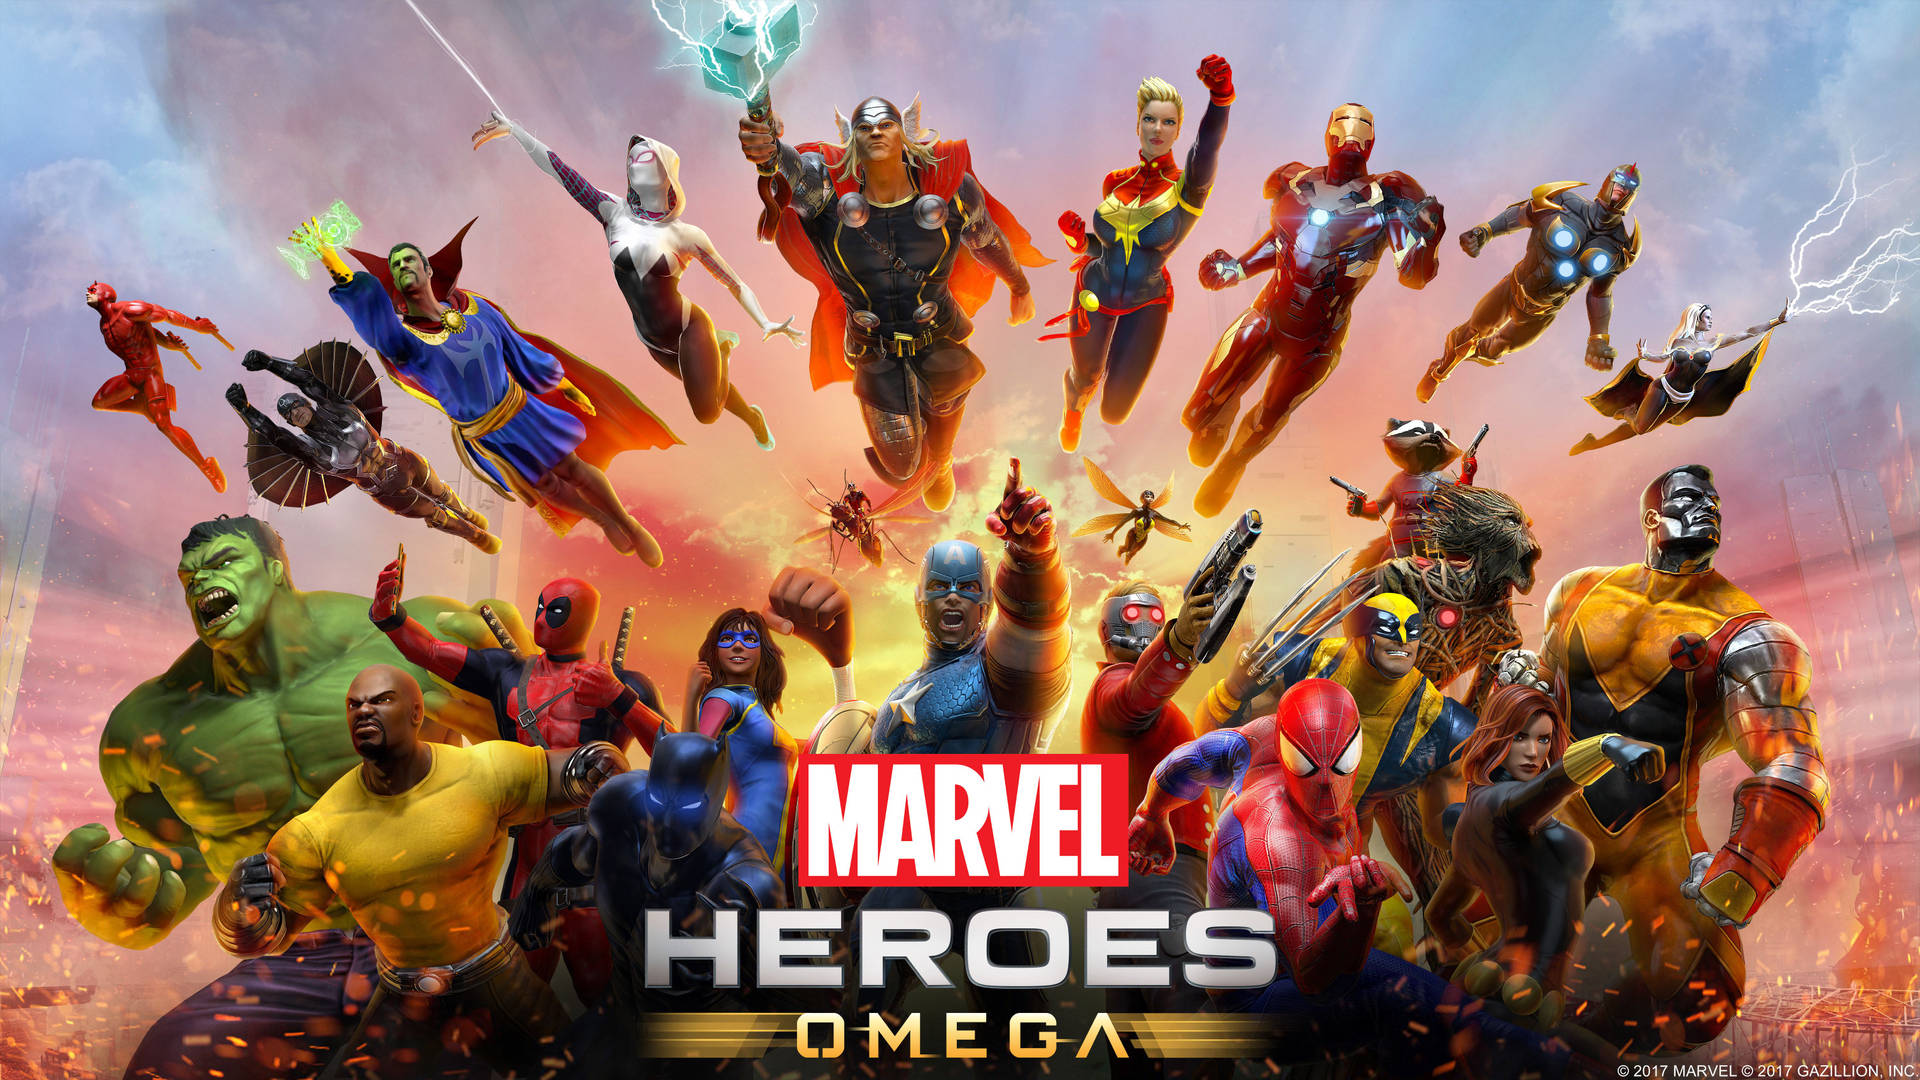 Marvel 6032X3393 Wallpaper and Background Image